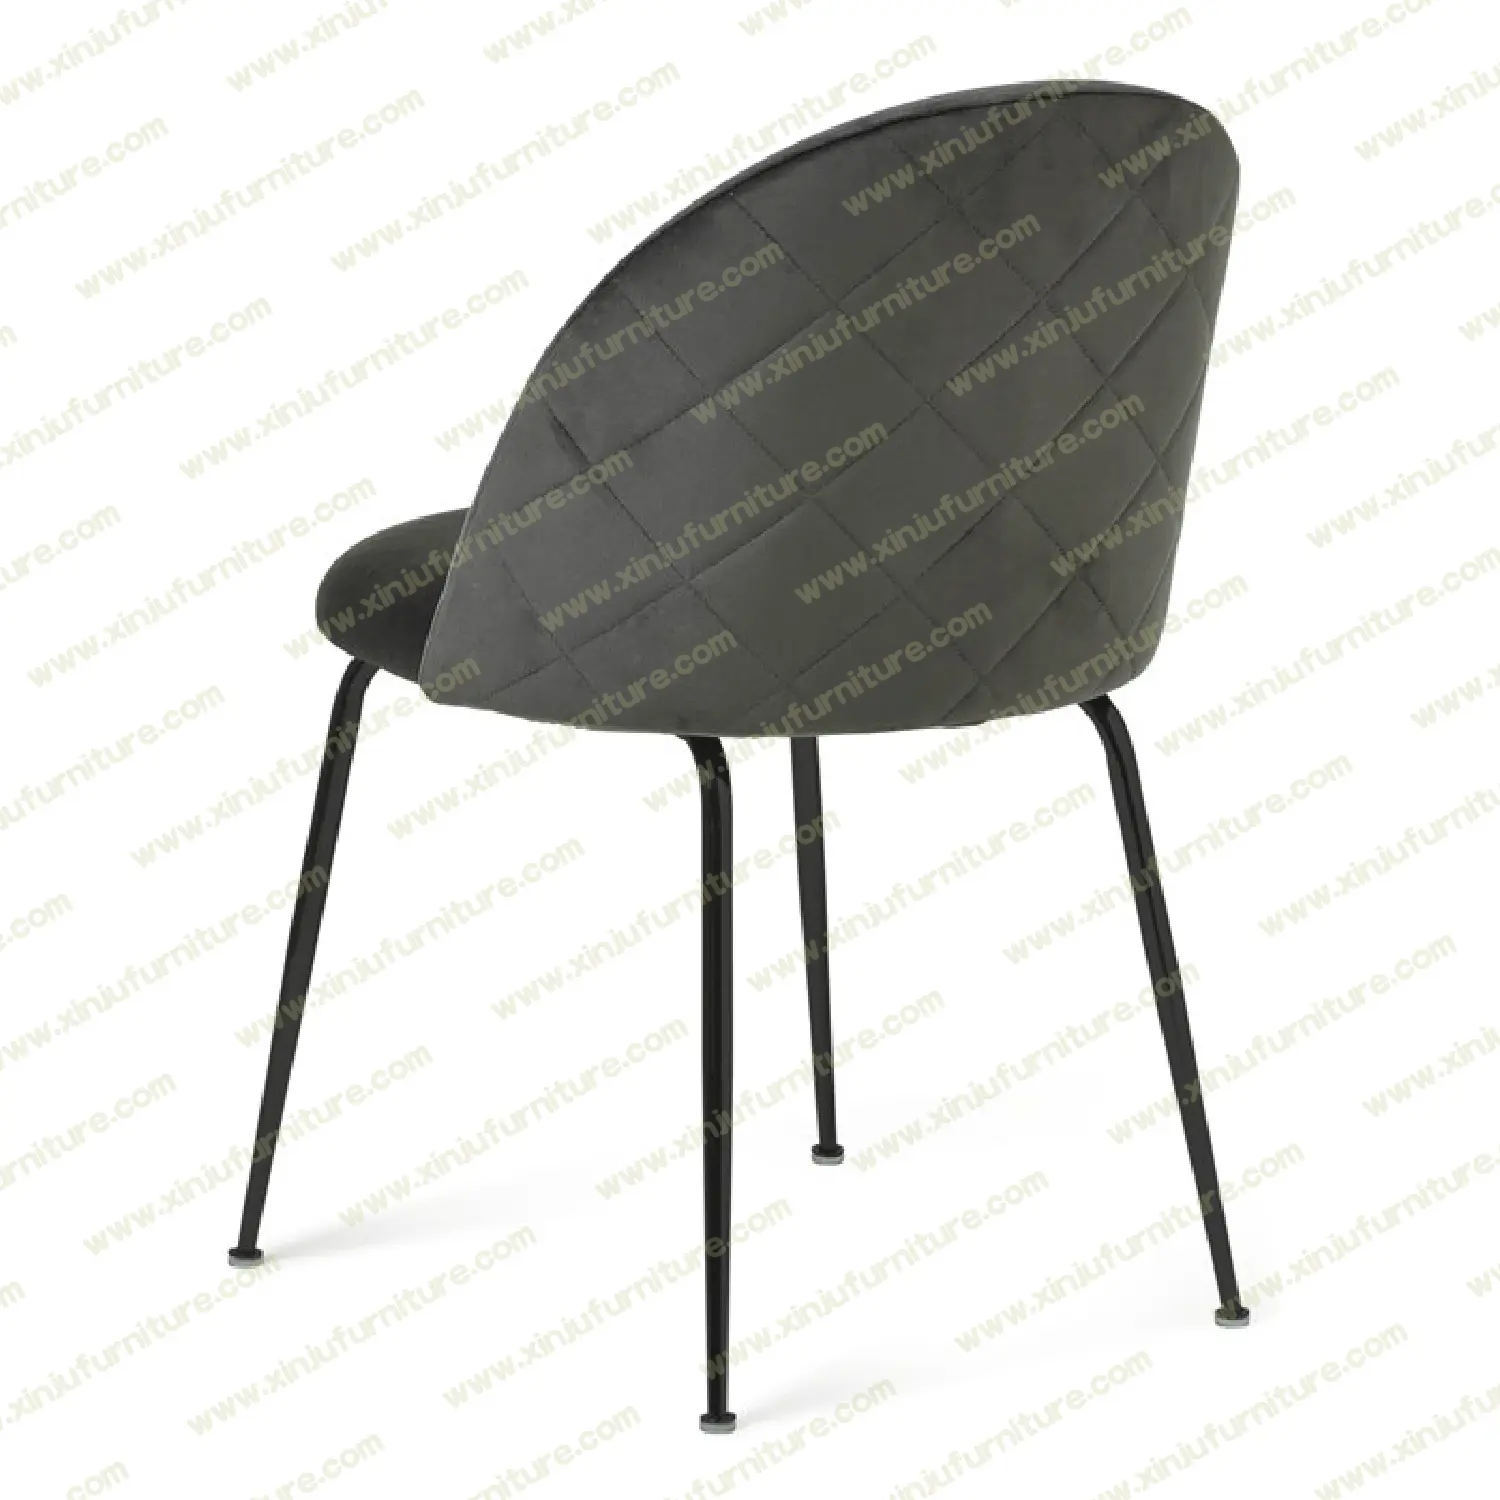 Tufted cute colorful dining chair dark gray